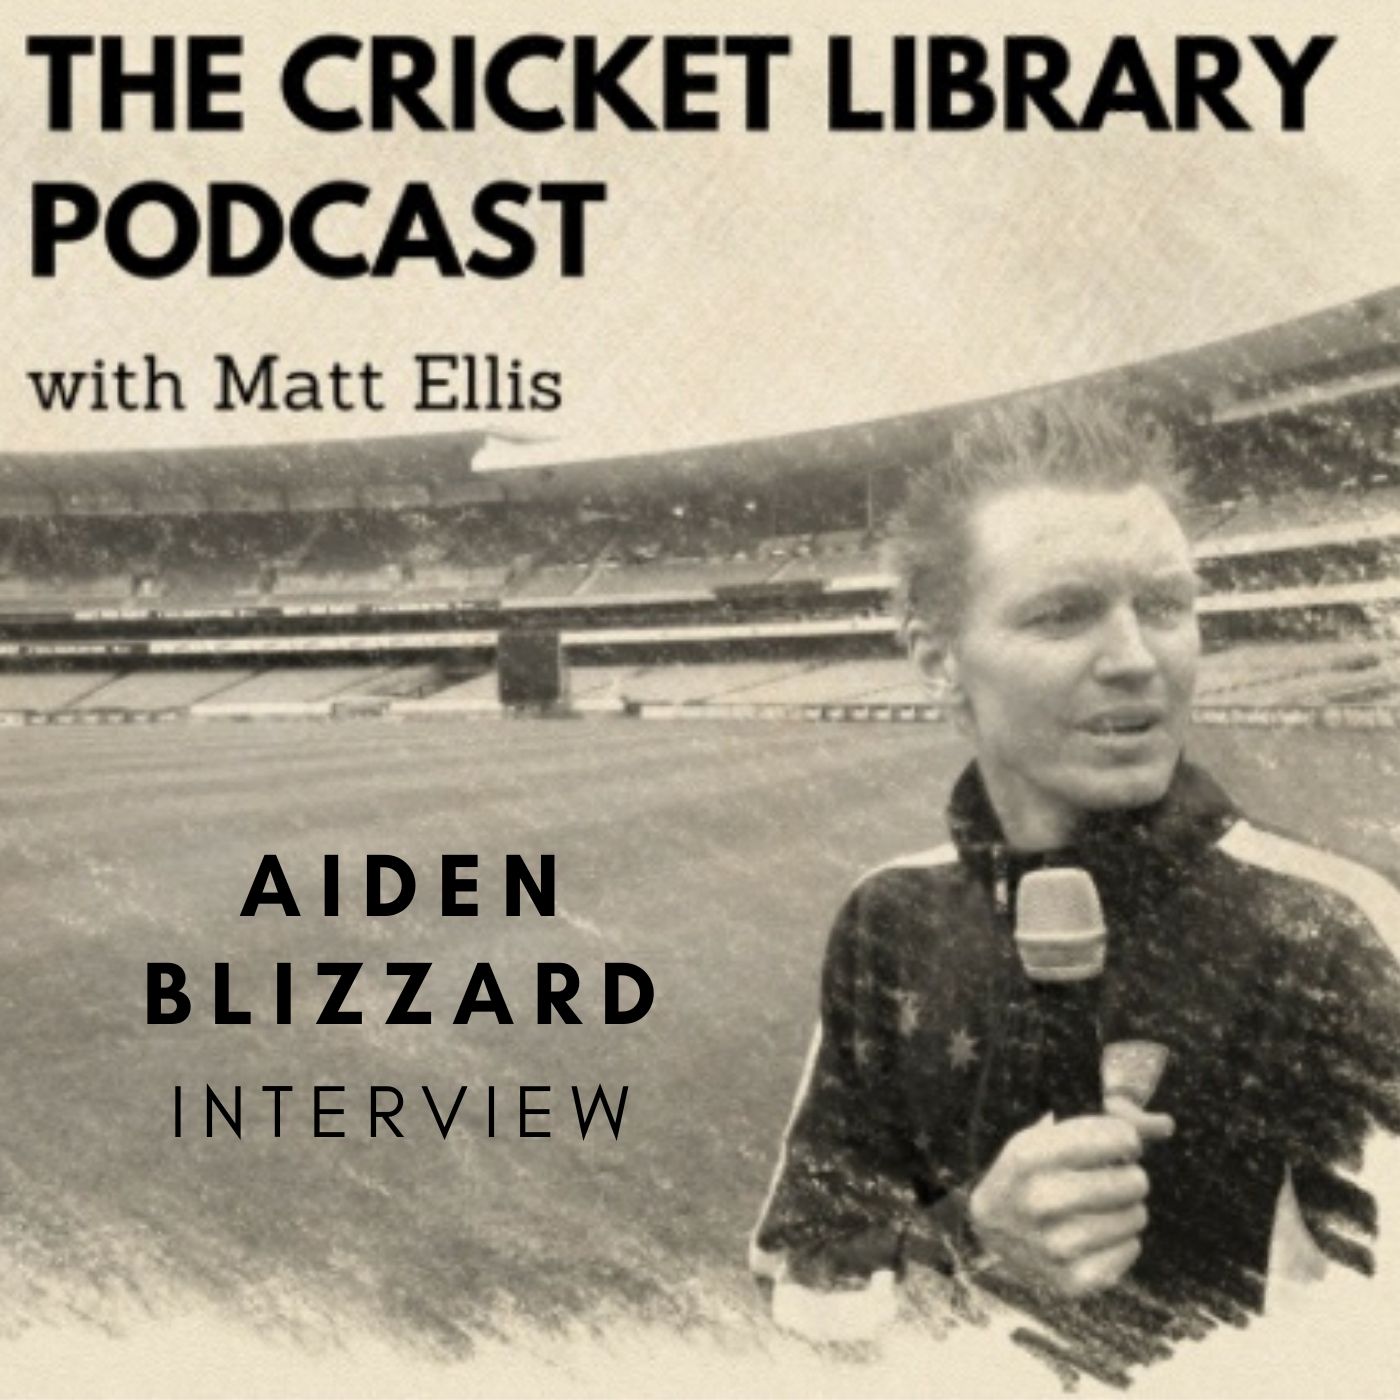 The Cricket Library Podcast - Interview with T20 power hitter Aiden Blizzard Image